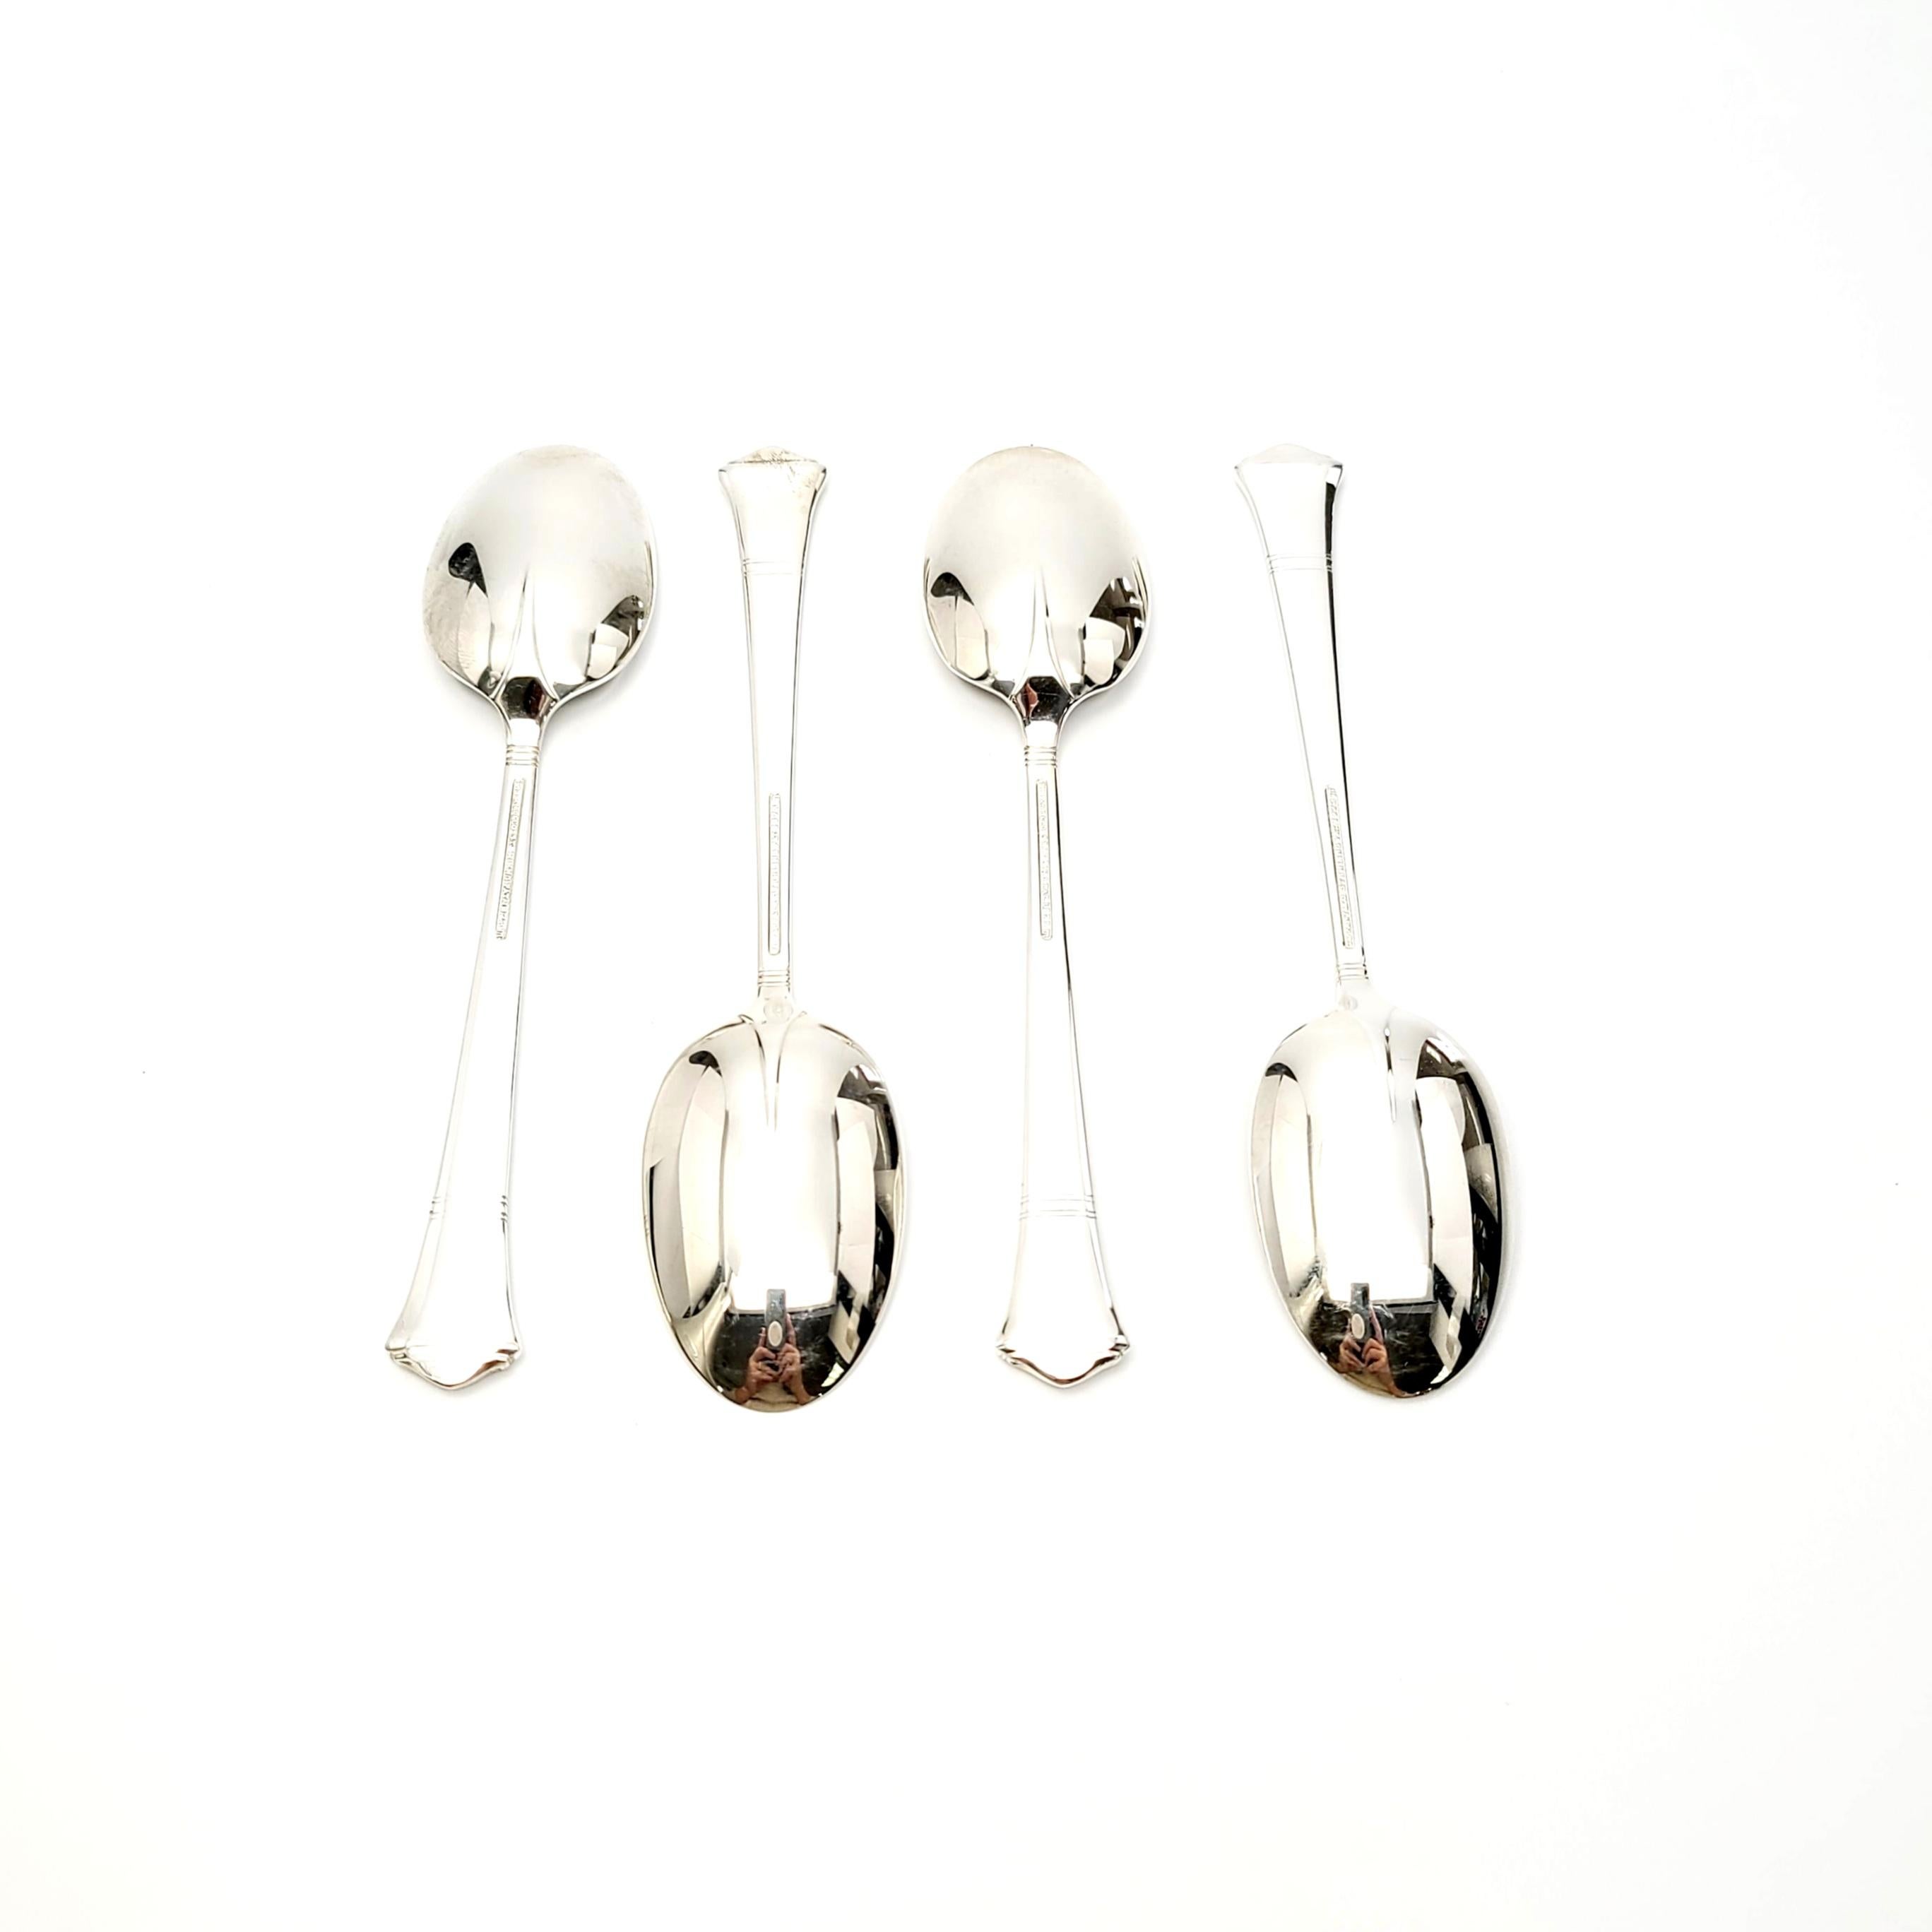 Set of 4 sterling silver teaspoons by Tiffany & Co. in the Hampton pattern.

No monogram.

Beautiful set of teaspoons in the Hampton pattern which was in produced in 1934. The pattern's simple and elegant design makes it a timeless Classic that